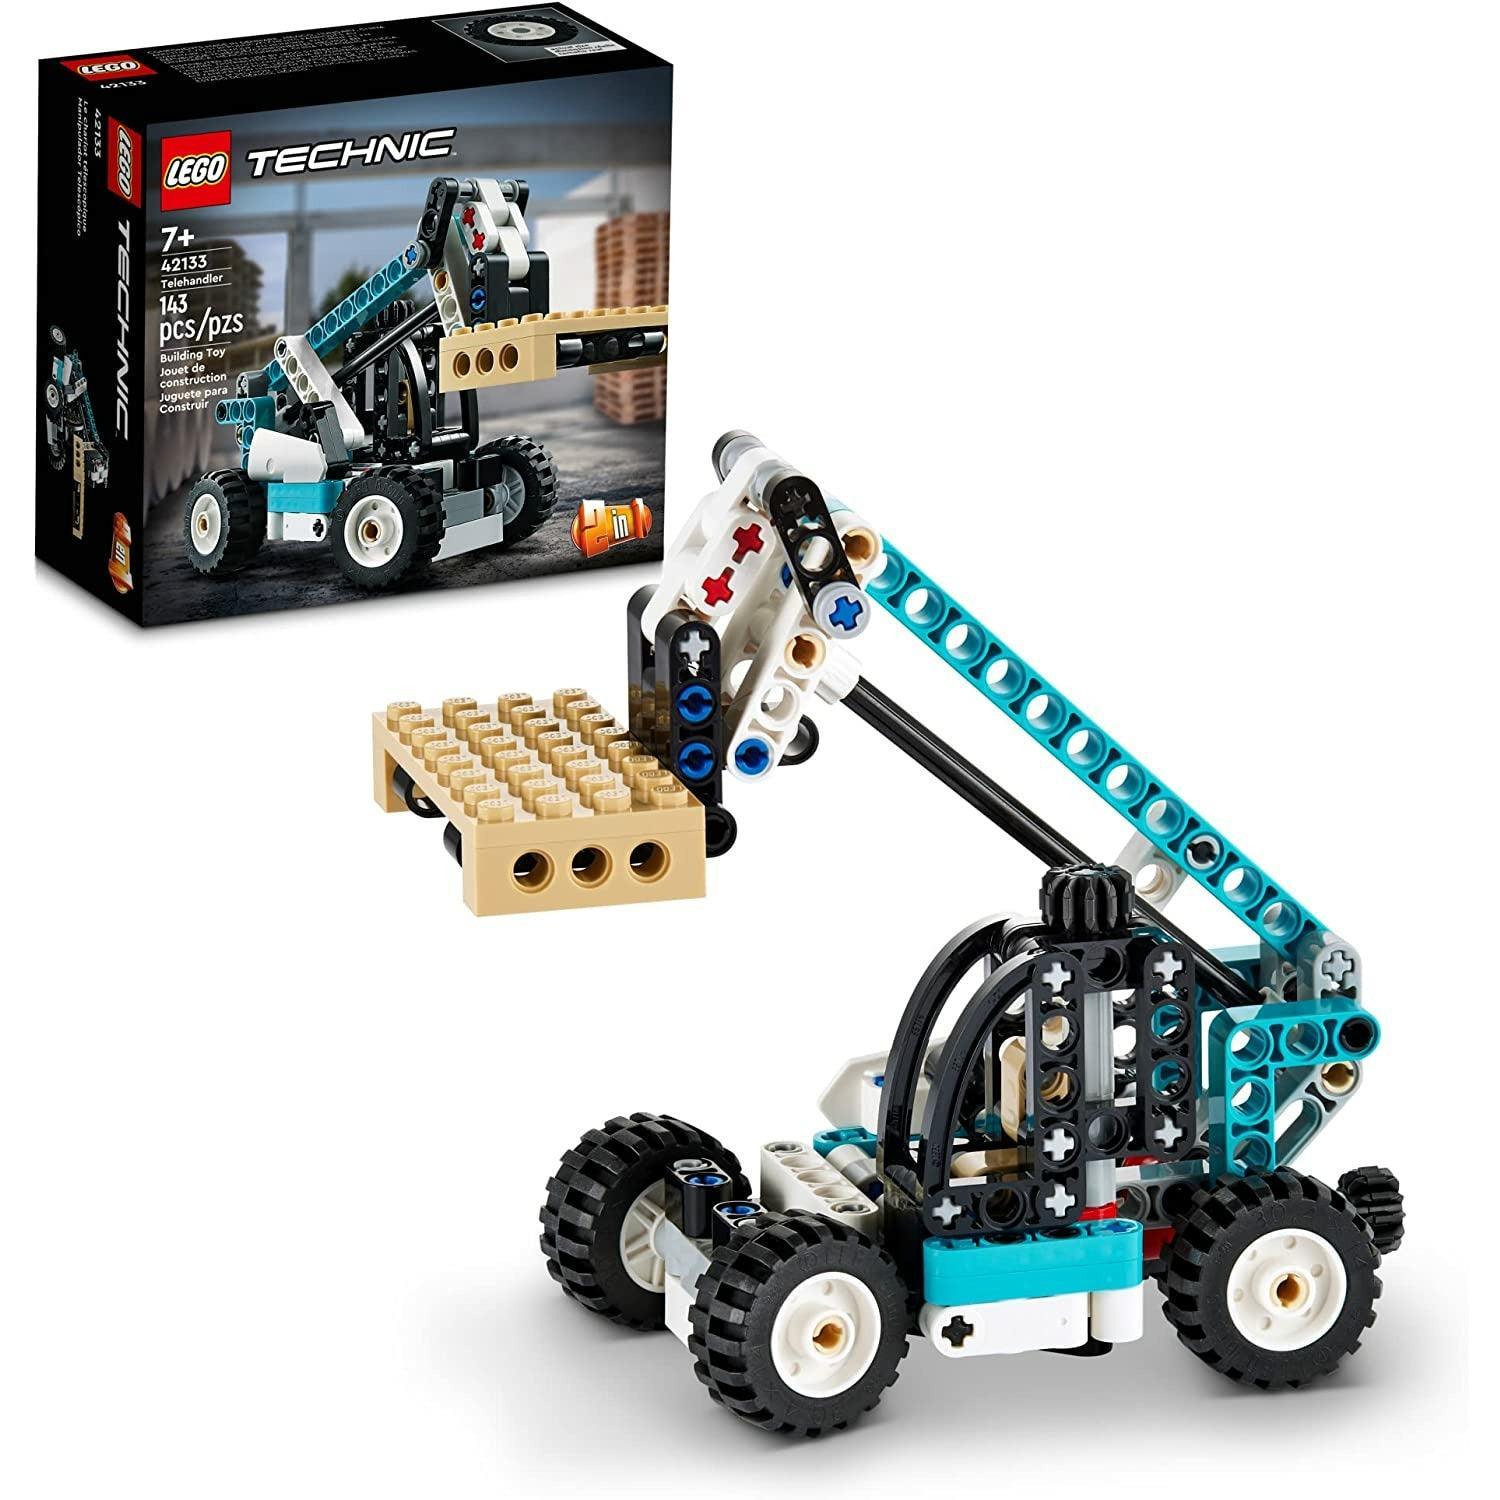 LEGO Technic Telehandler 42133 Model Building Kit; 2-in-1 Rebuilds into a Tow Truck Toy Model (143 Pieces) - BumbleToys - 8+ Years, 8-13 Years, Boys, LEGO, Motorcycle, OXE, Pre-Order, Technic